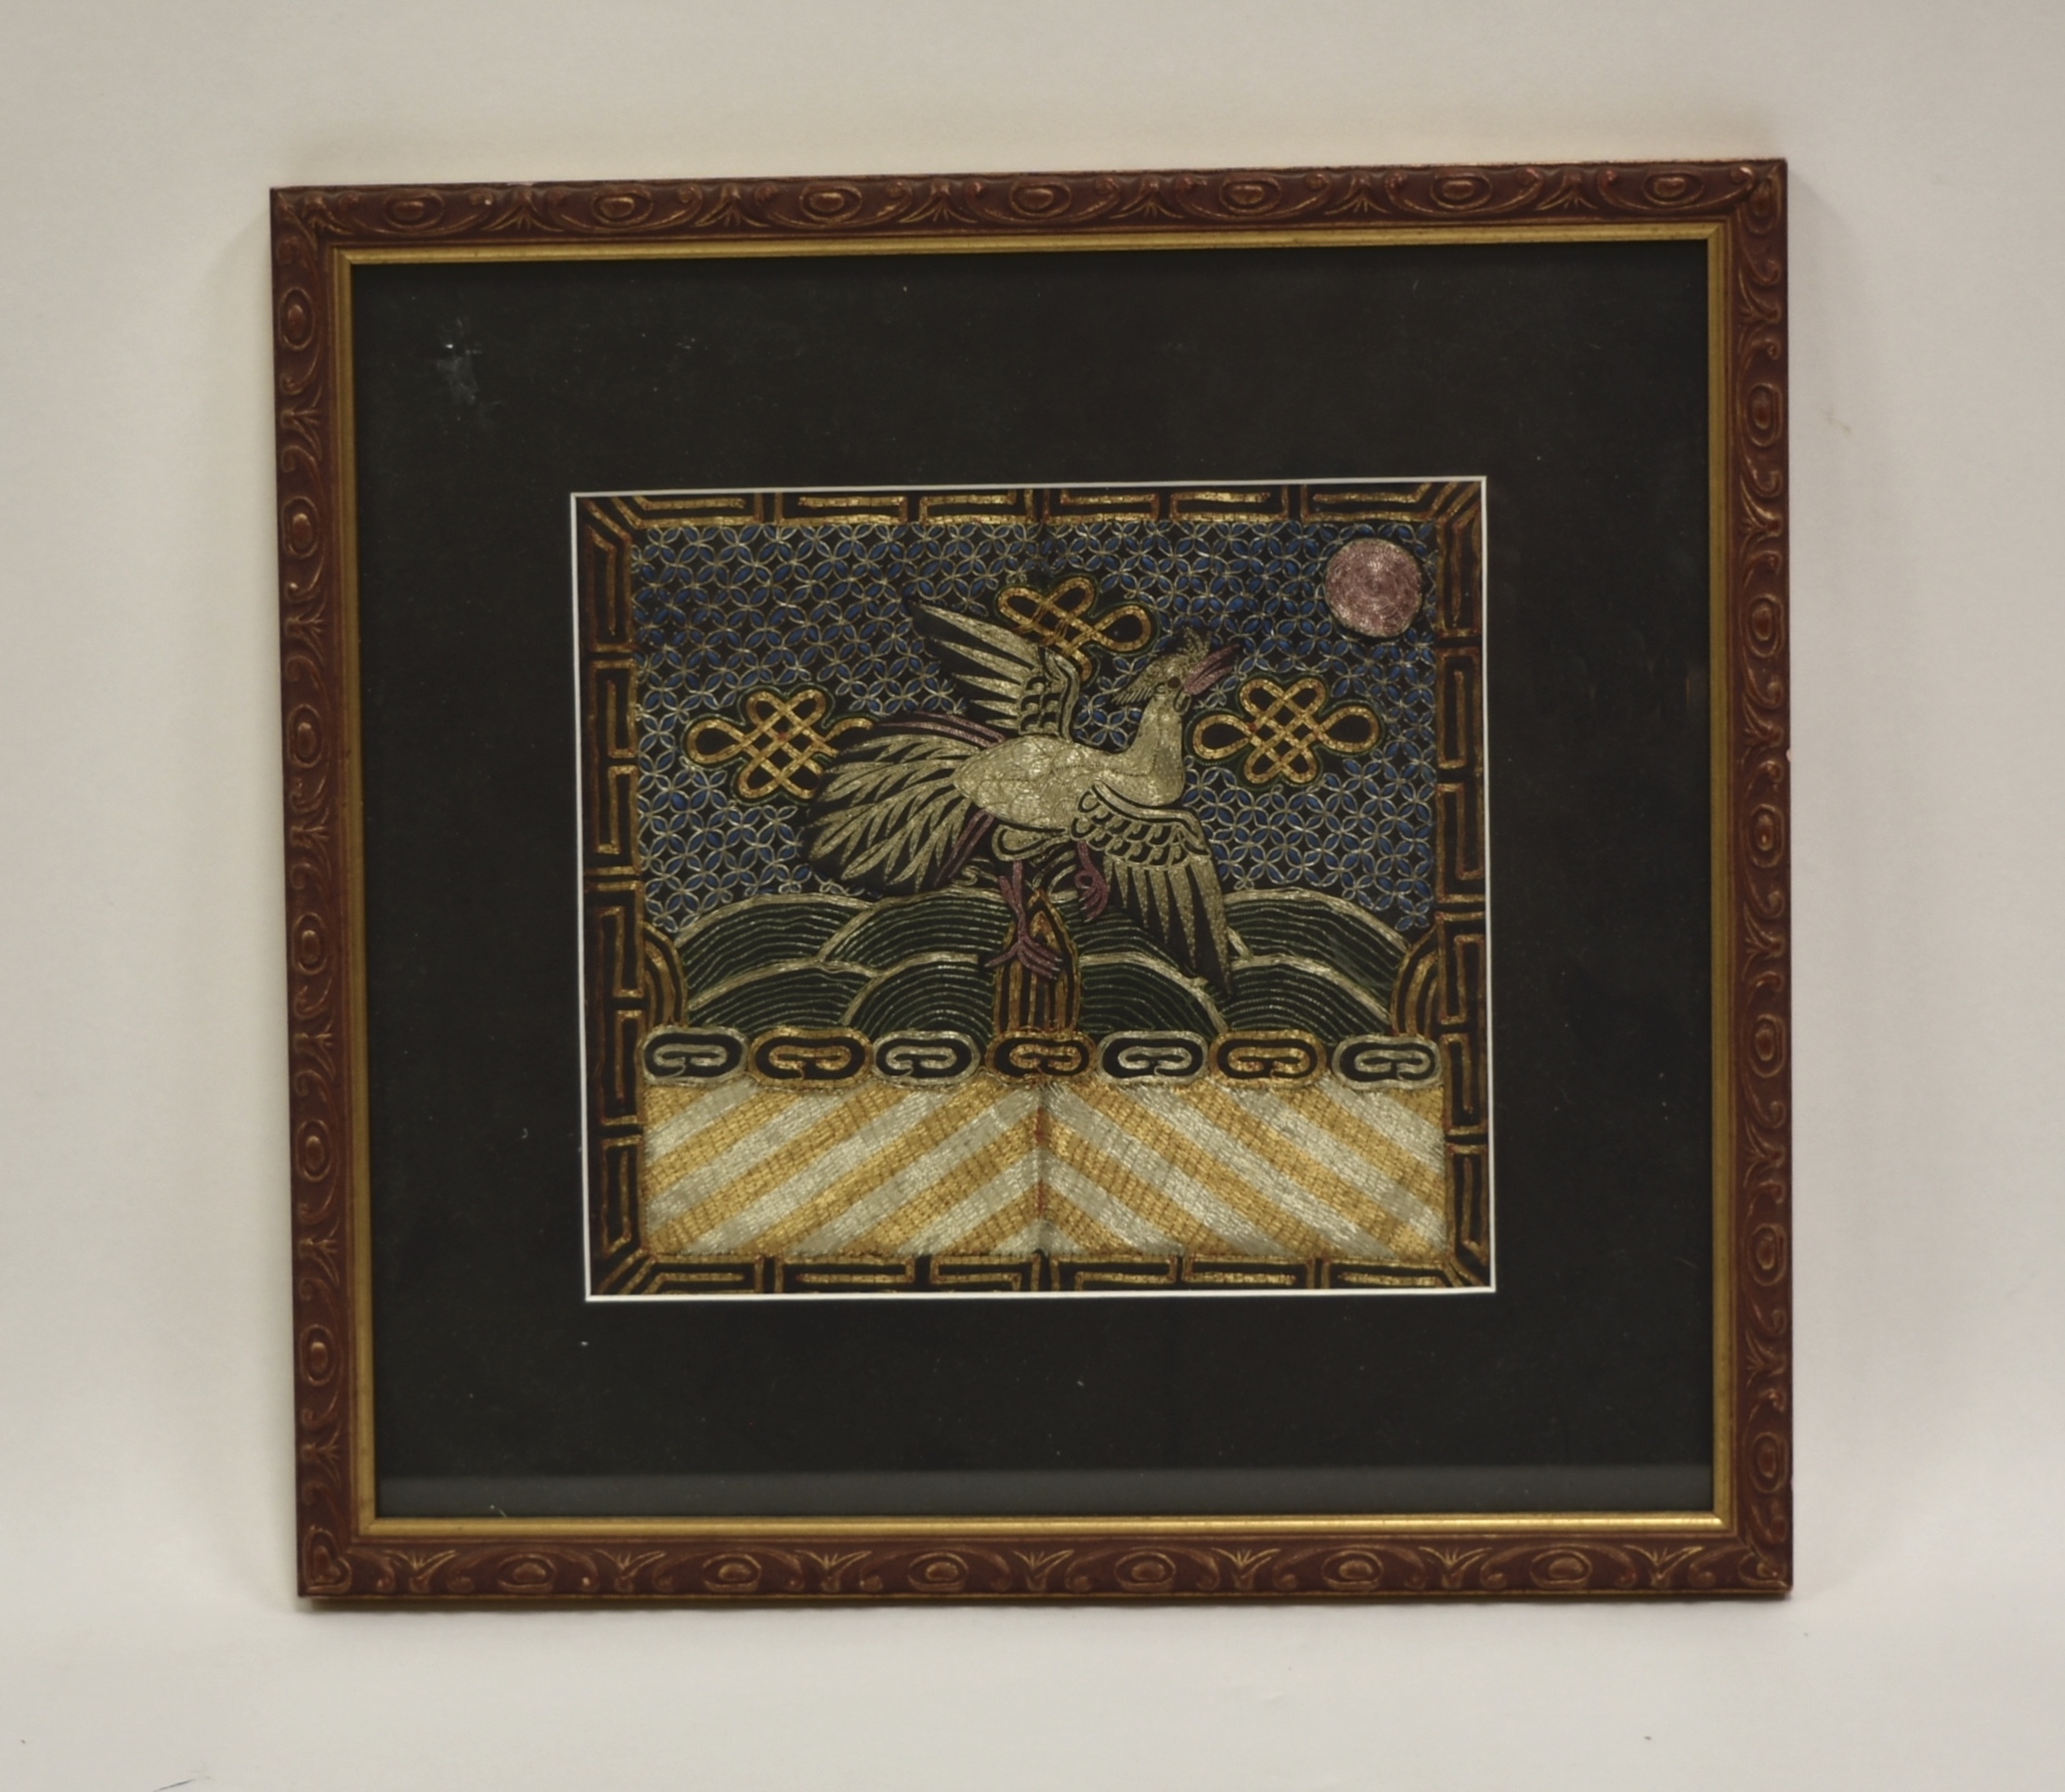 CHINESE FRAMED EMBROIDERY "BUZI"